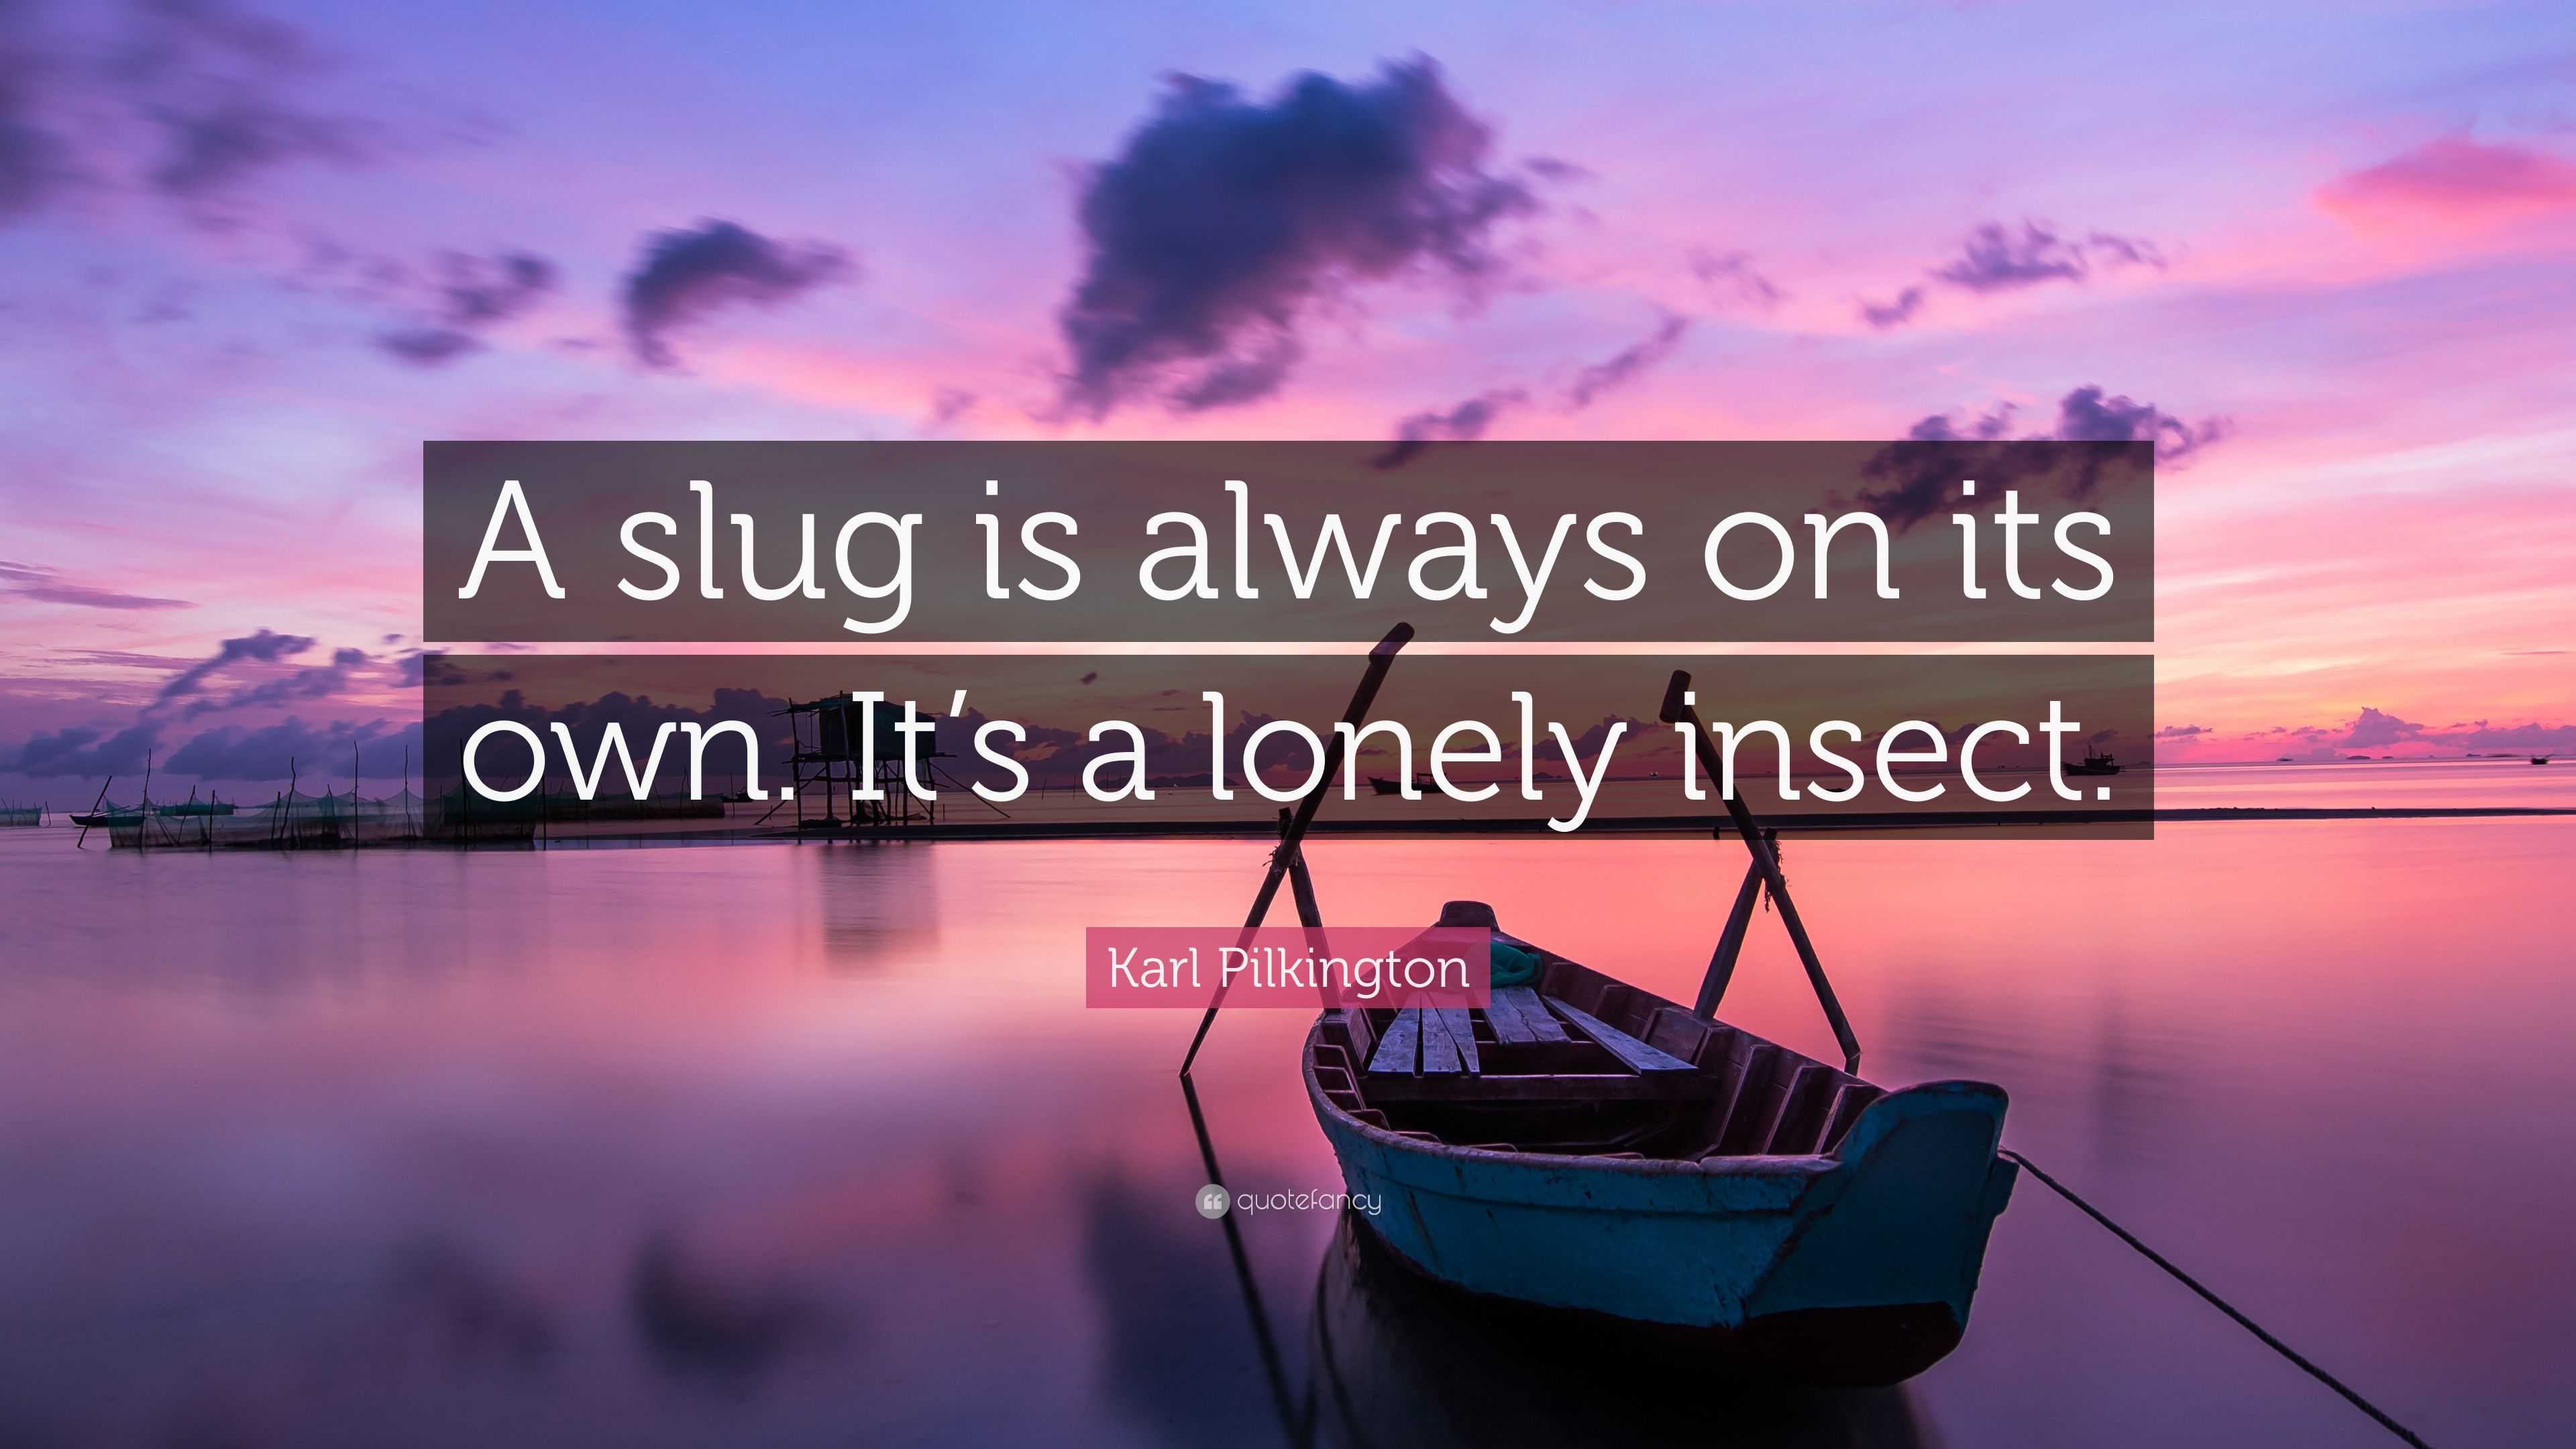 Karl Pilkington Quote: "A slug is always on its own. It's a lonely insect."